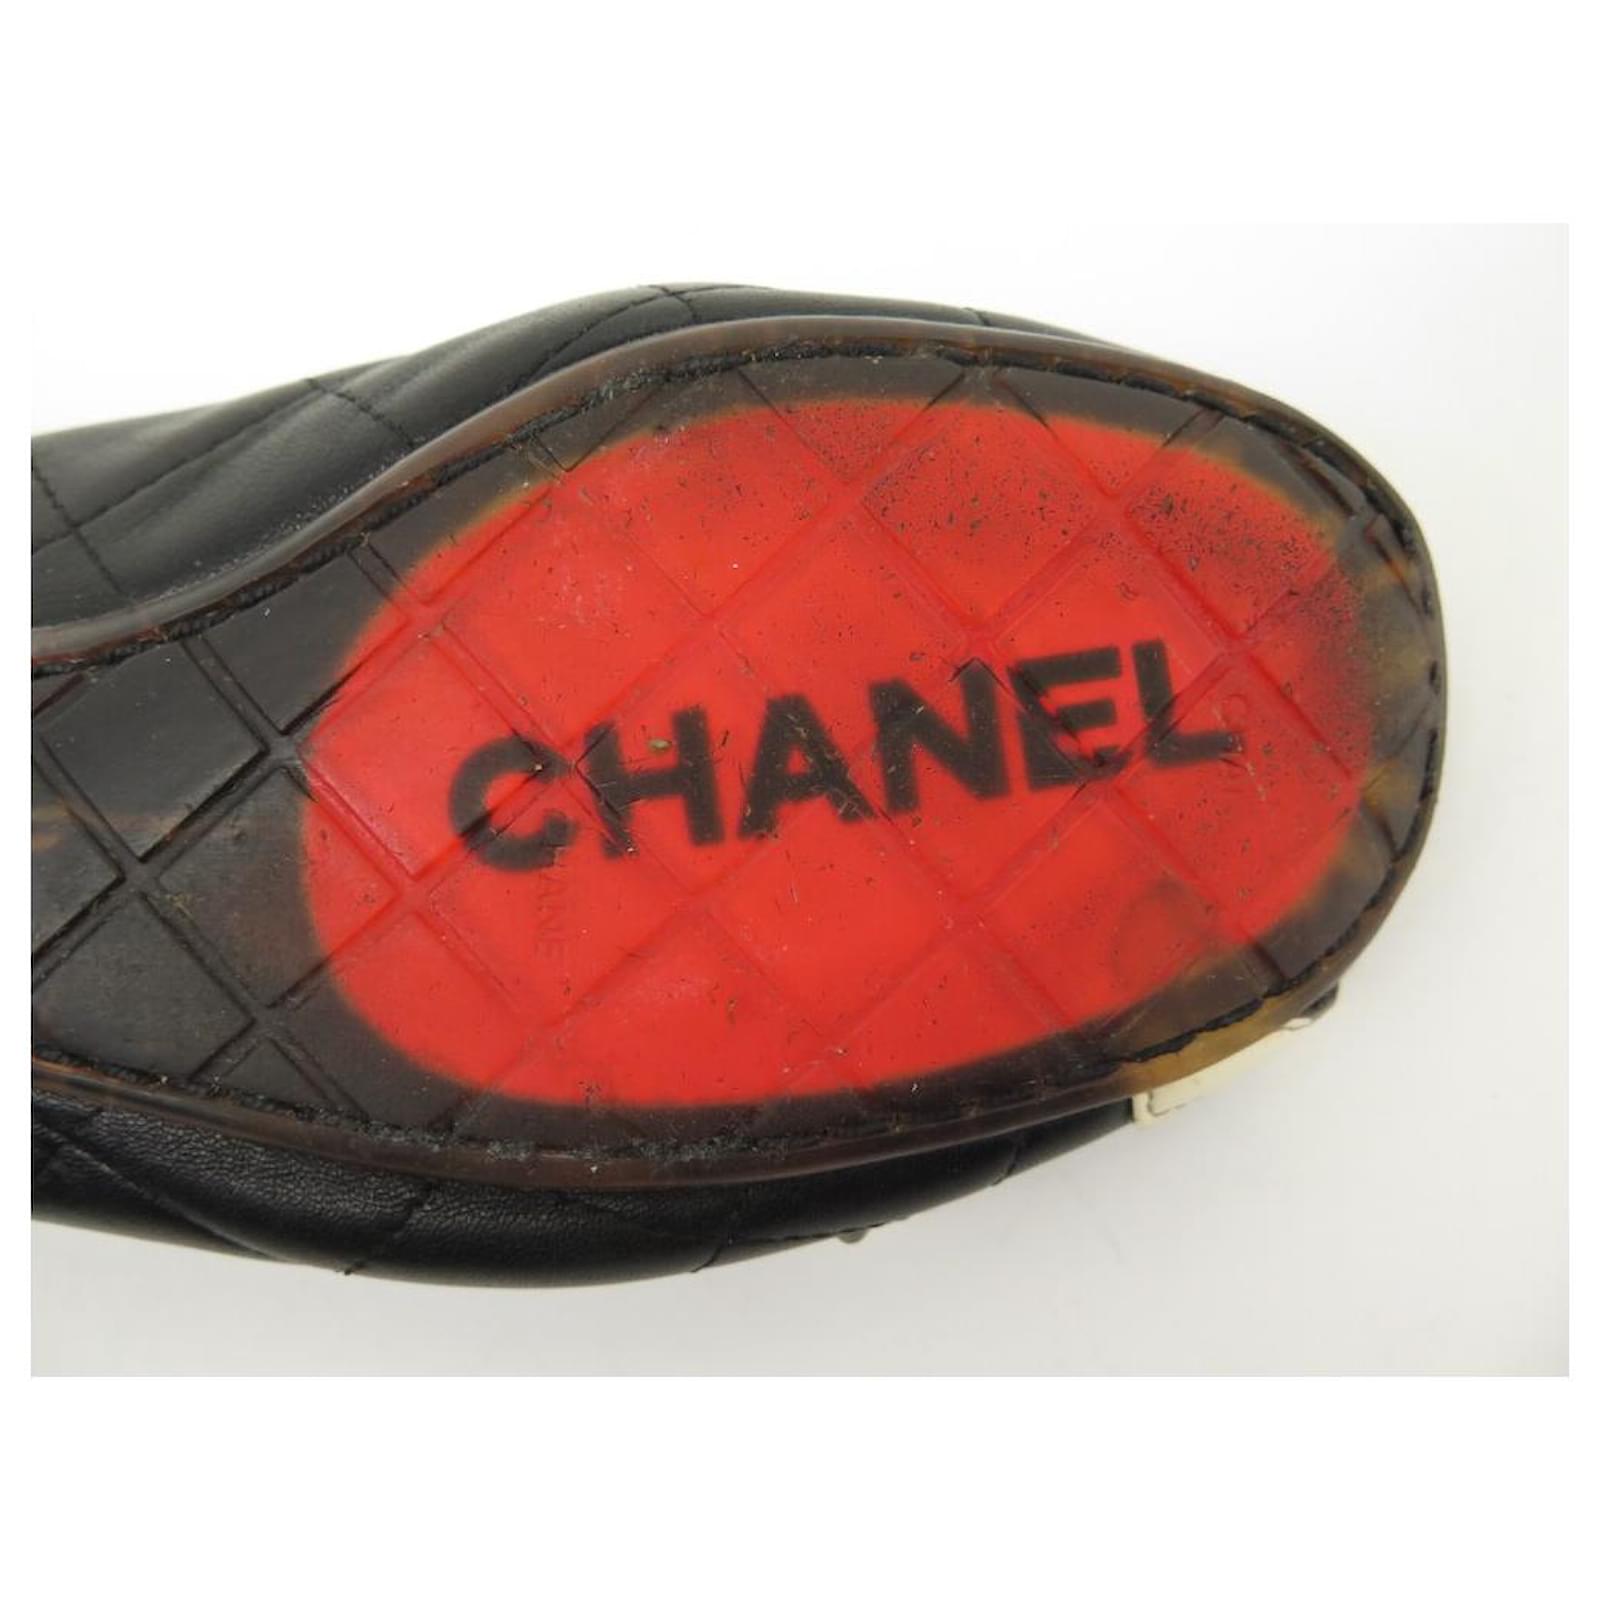 CHANEL SHOES BALLERINAS CAMBON G24712 38 LOGO CC BLACK QUILTED LEATHER  ref.797286 - Joli Closet